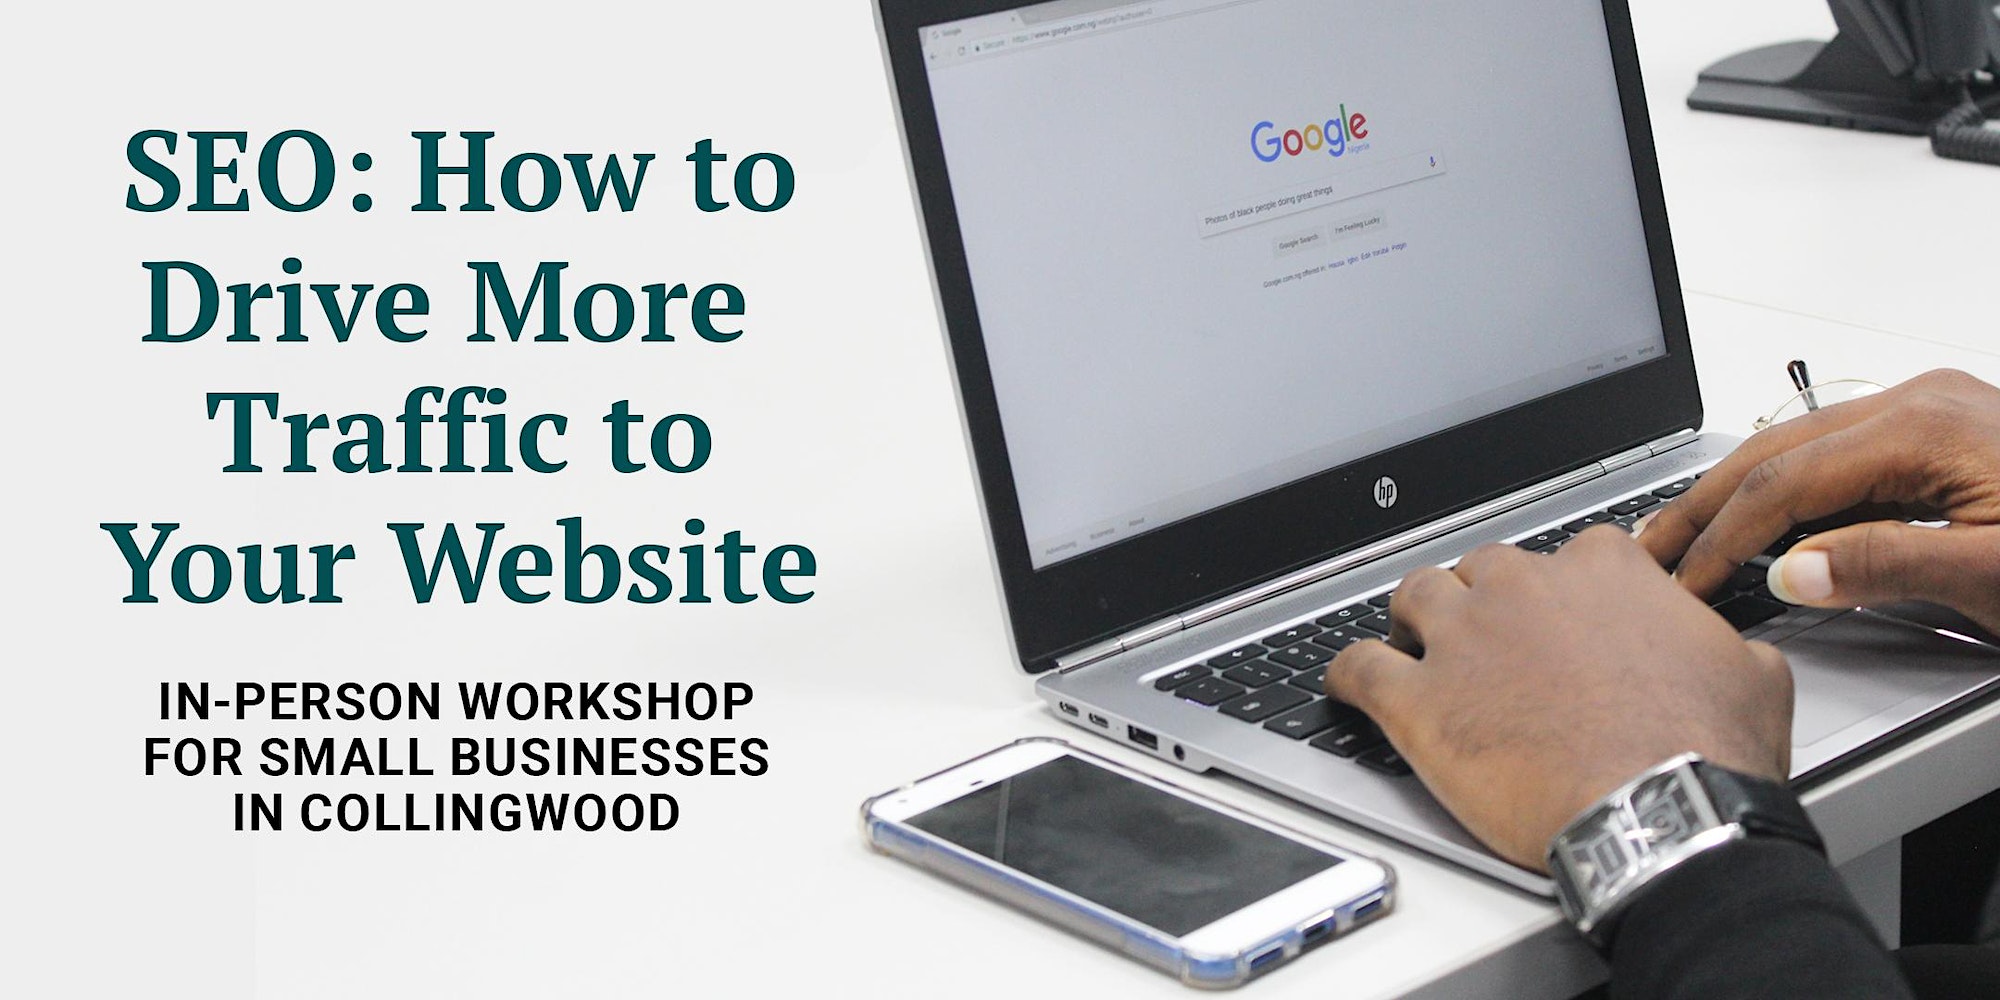 SEO: How to drive more traffic to your website. In-person workshop for small businesses in Collingwood